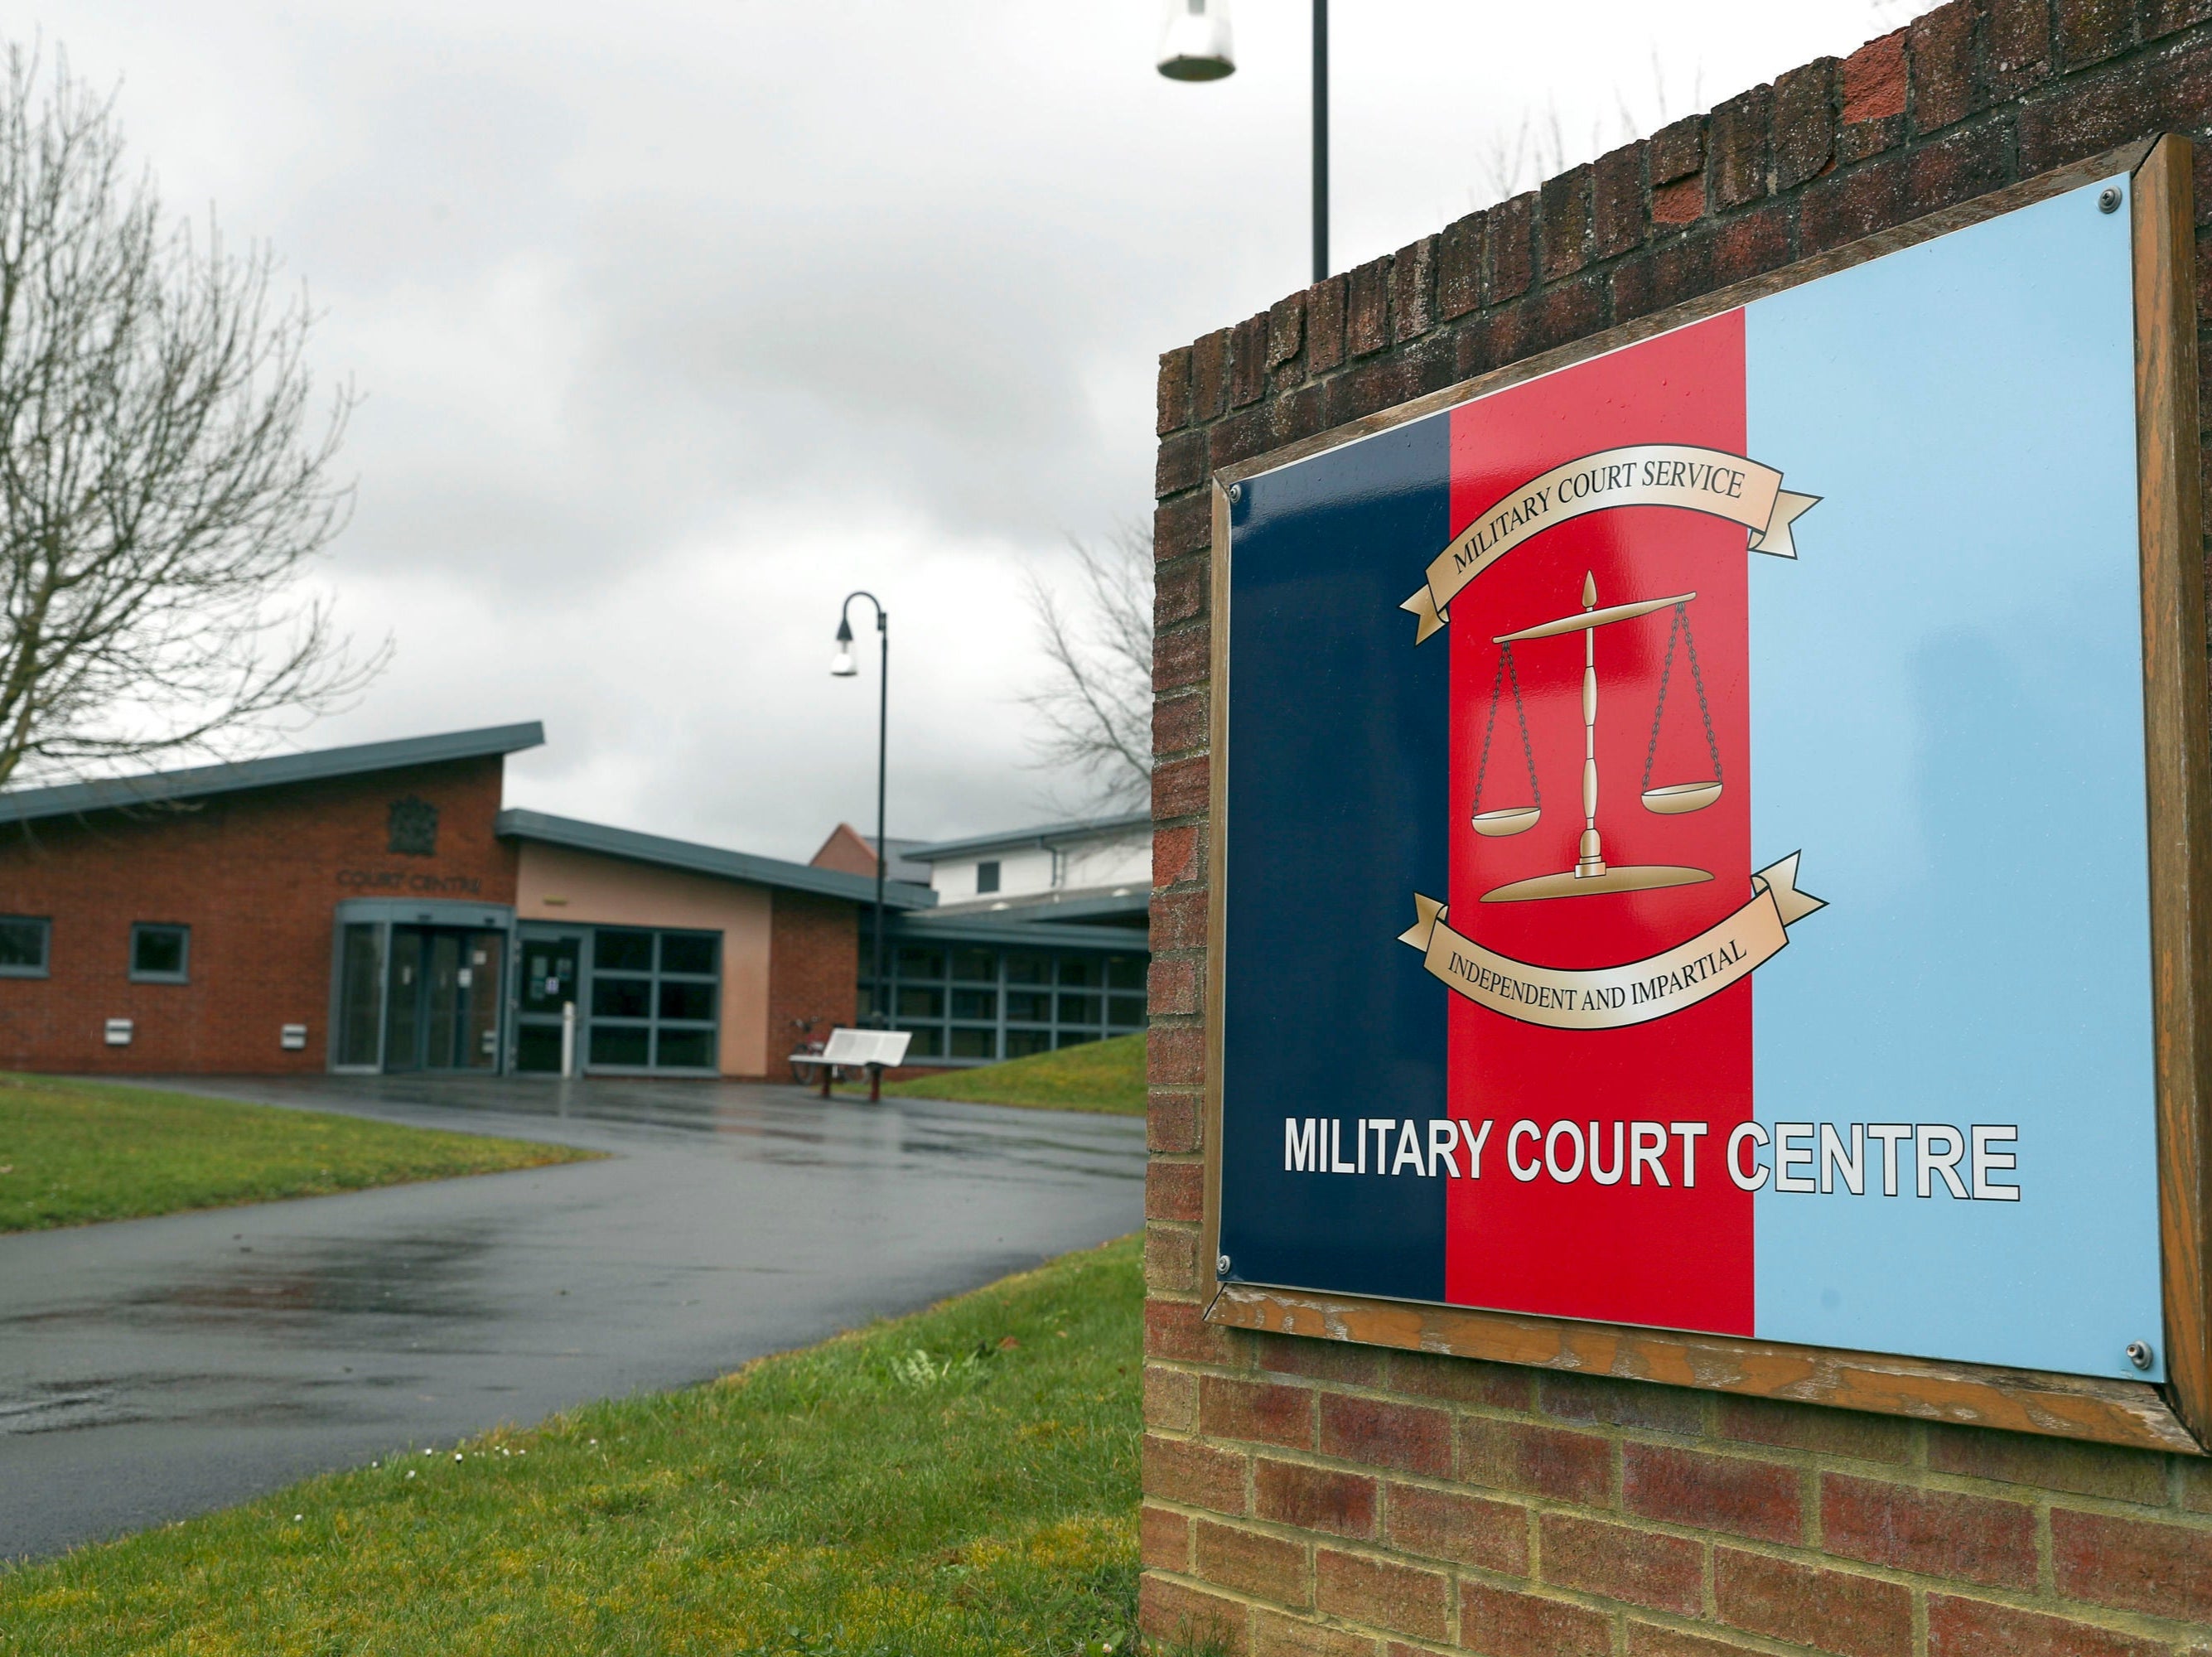 Lance Corporal Storm Elliott has been found guilty of twice touching the young woman inappropriately in a trial at Bulford military court in Salisbury, Wiltshire